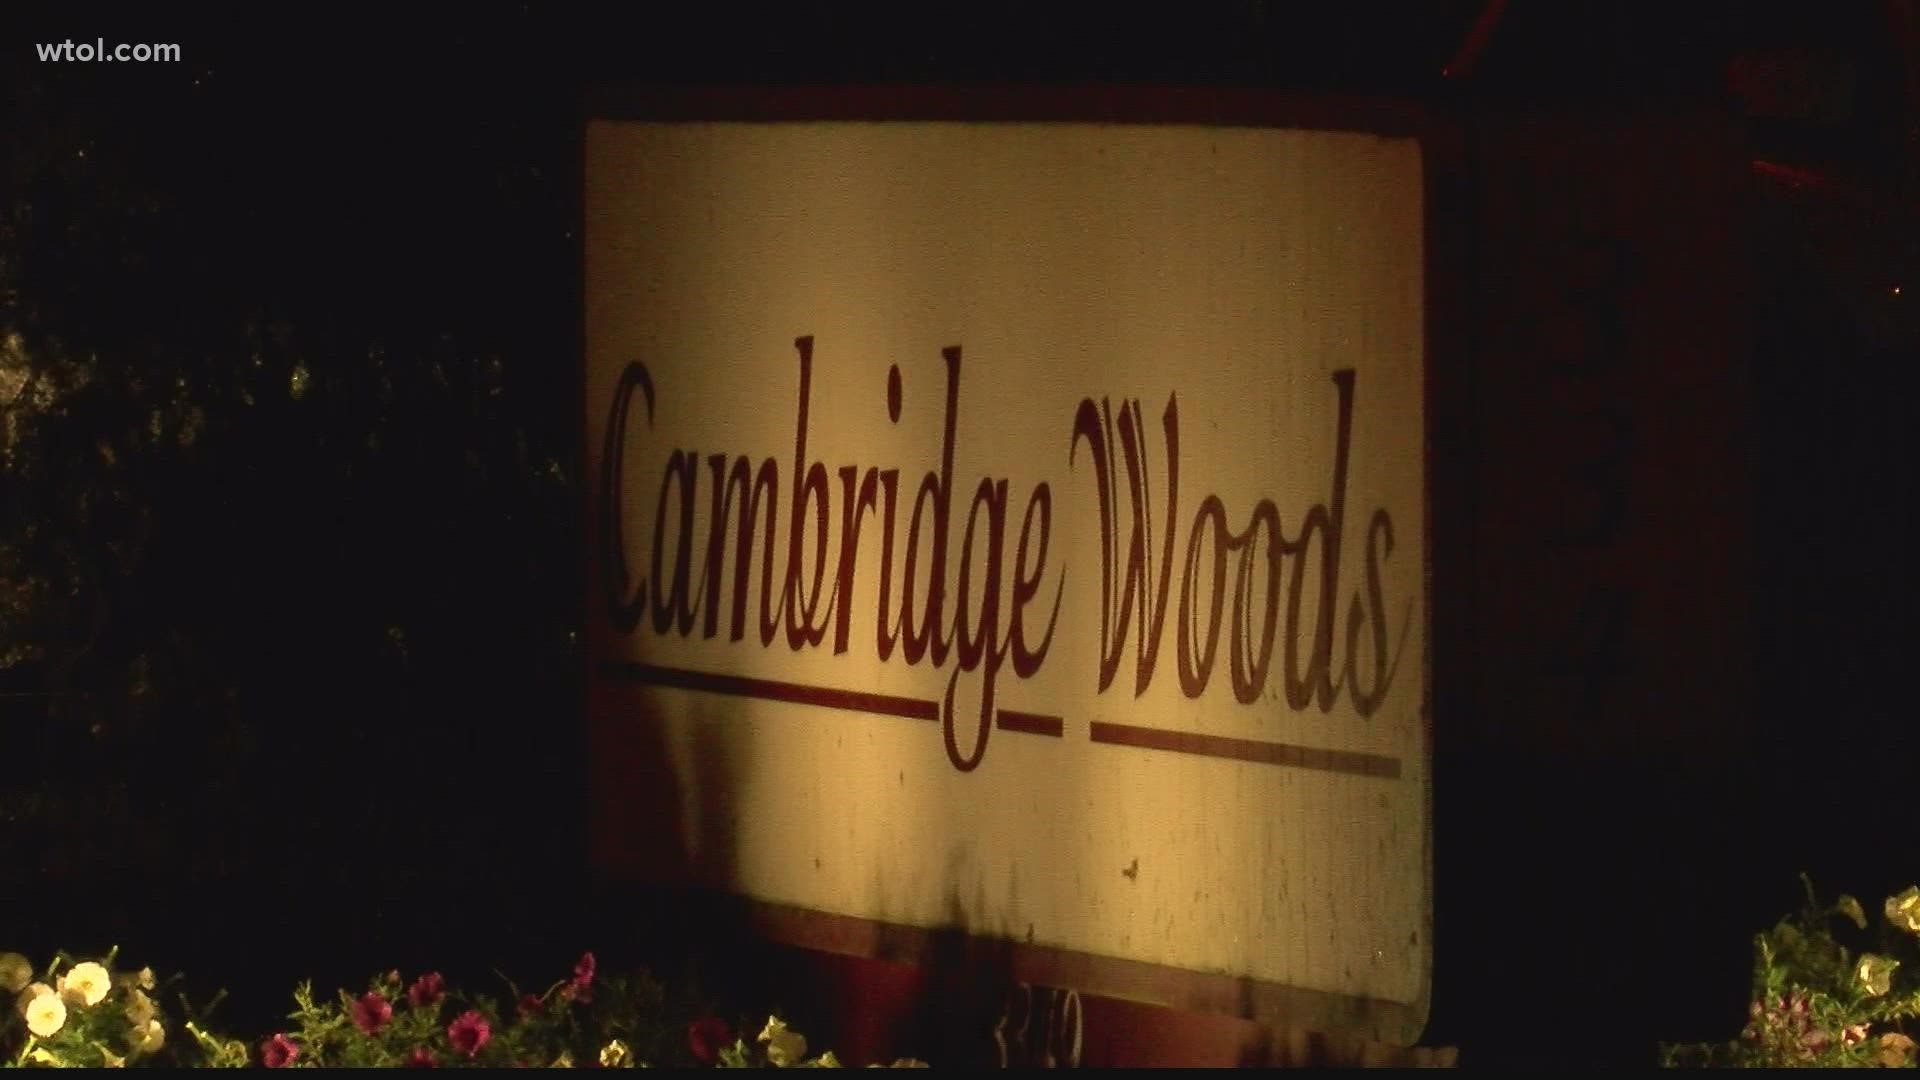 The fire started at the Cambridge Woods Apartment on Airport Highway